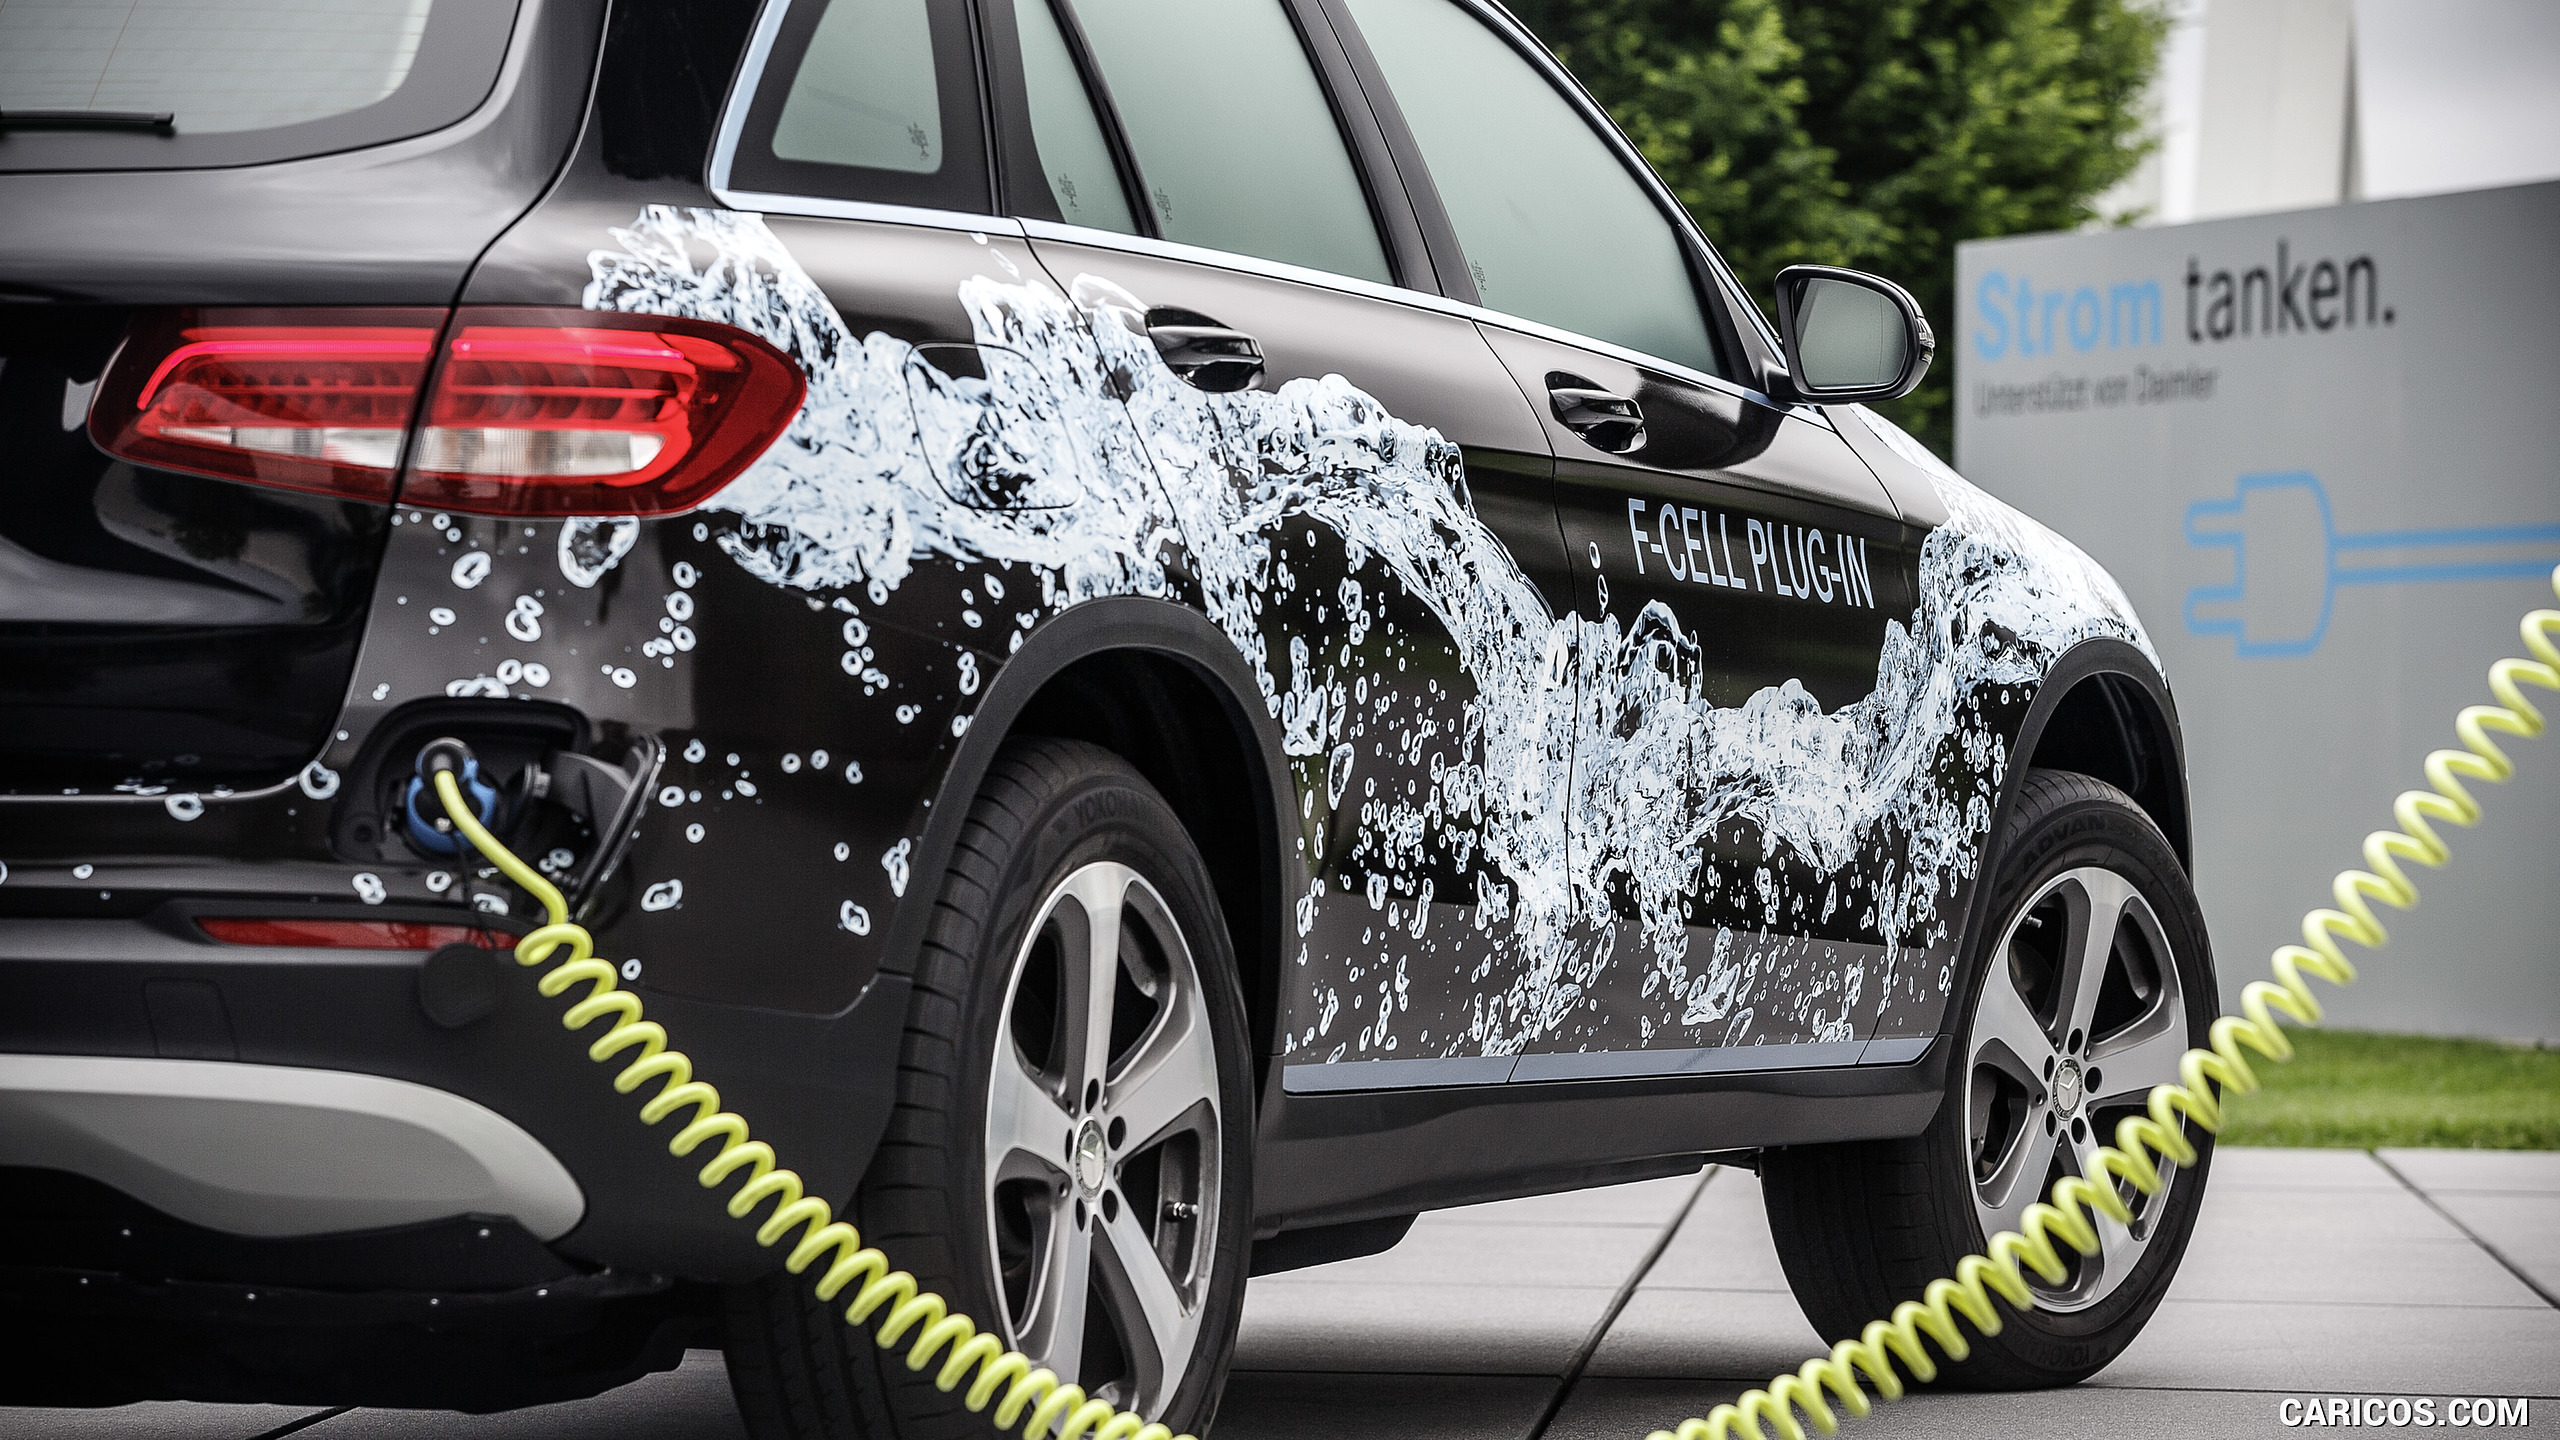 2016 Mercedes-Benz GLC F-Cell Plug-In Concept - Plugged In, #10 of 20